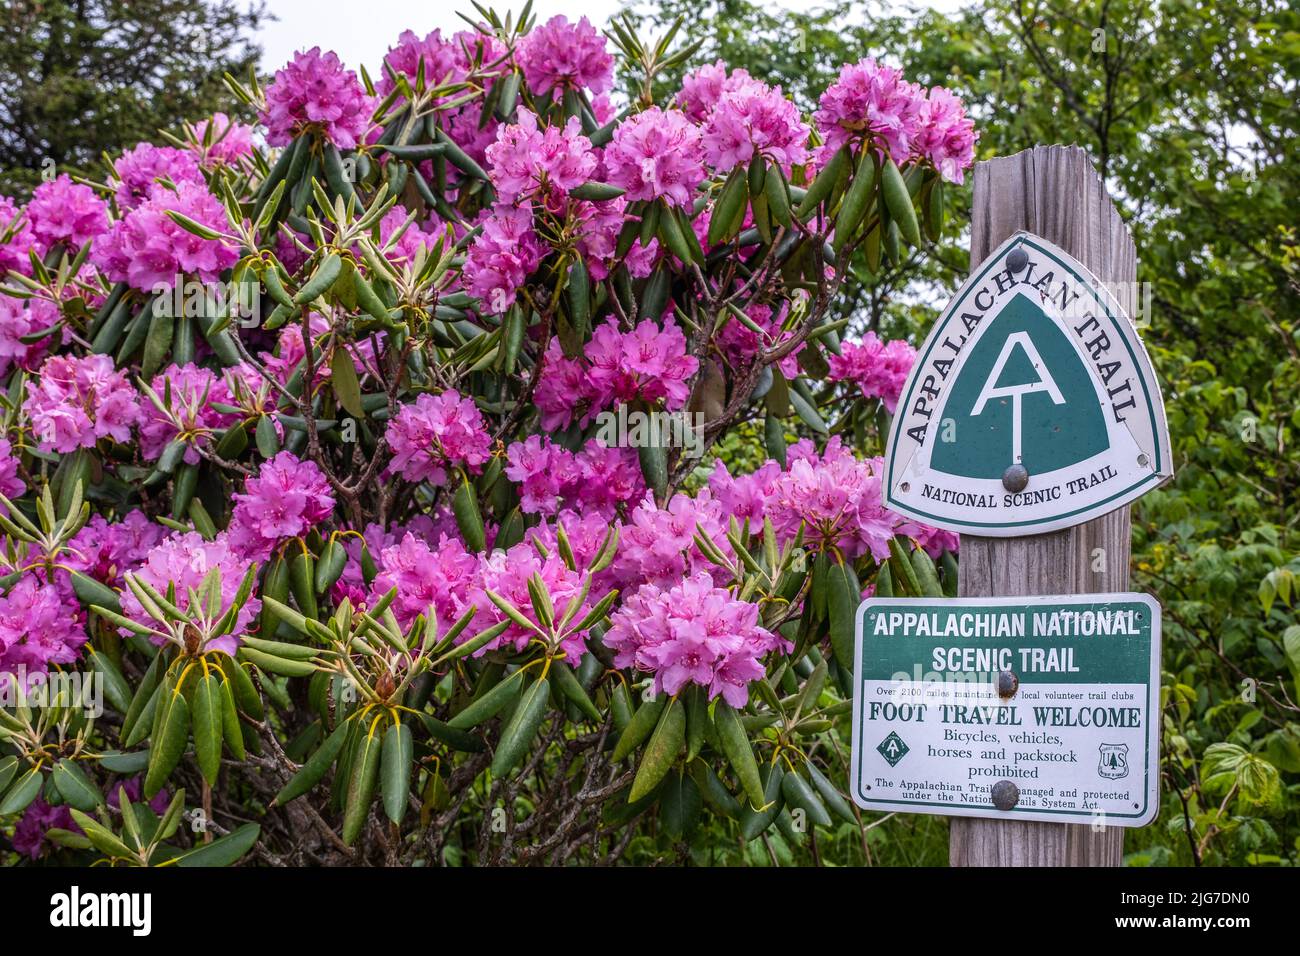 Appalachian Trail sign on a wood post in front of blooming purple Rhododendron flowers Stock Photo